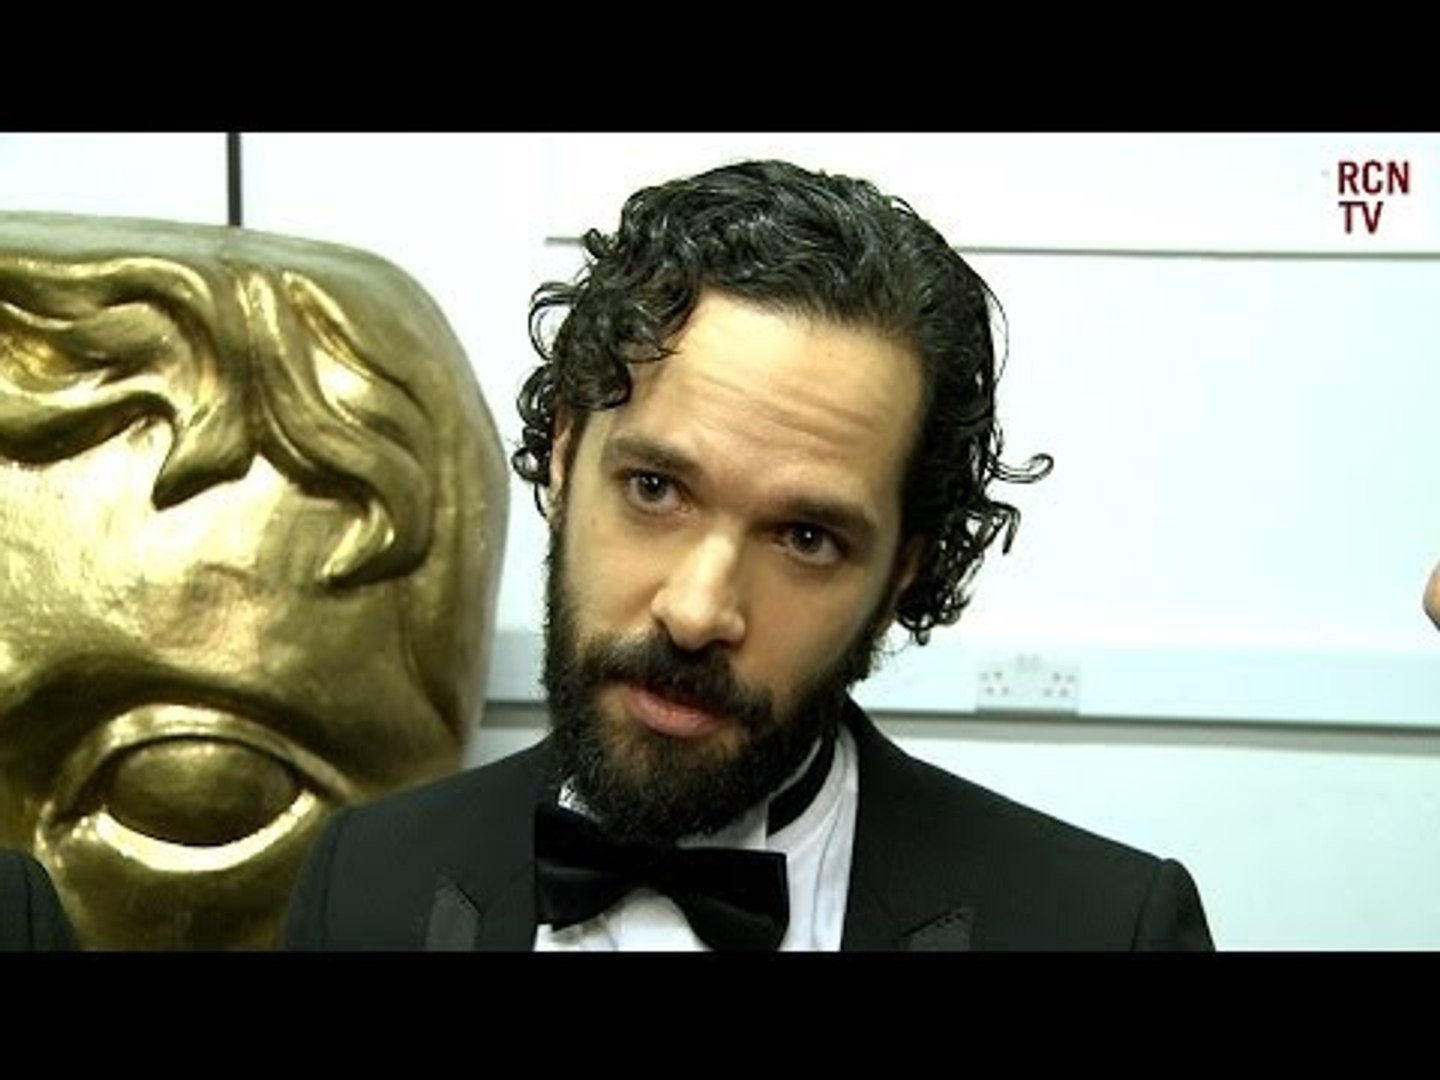 Troy Baker Interview at the BAFTA Games Awards 2016 - The Sound